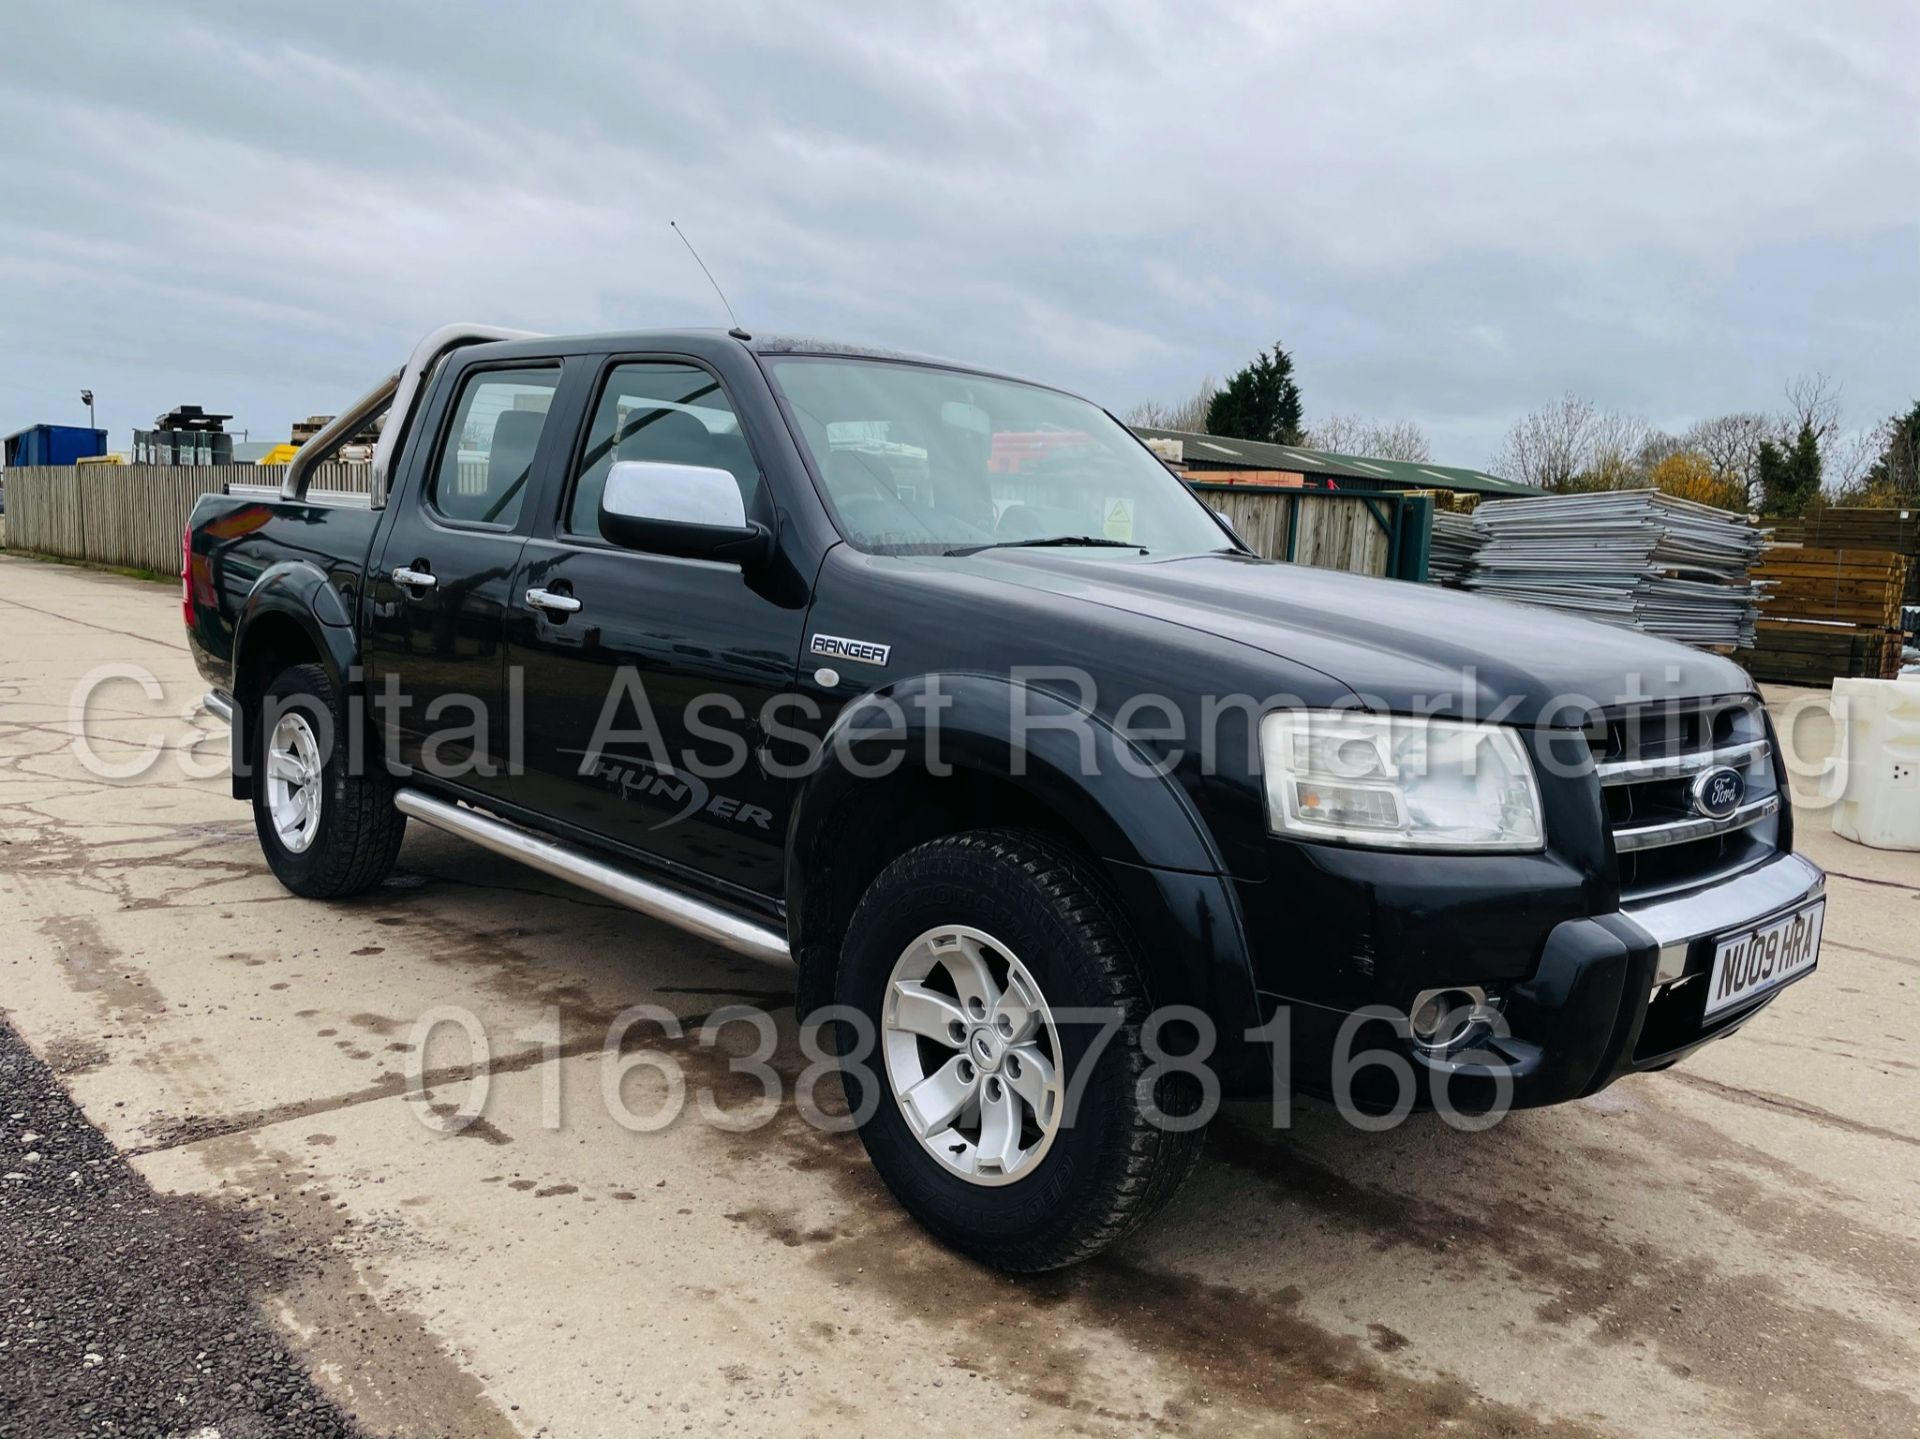 ON SALE FORD RANGER *THUNDER* DOUBLE CAB 4X4 PICK-UP (2009) '2.5 TDCI - 1 *LEATHER - A/C* (NO VAT) - Image 2 of 40